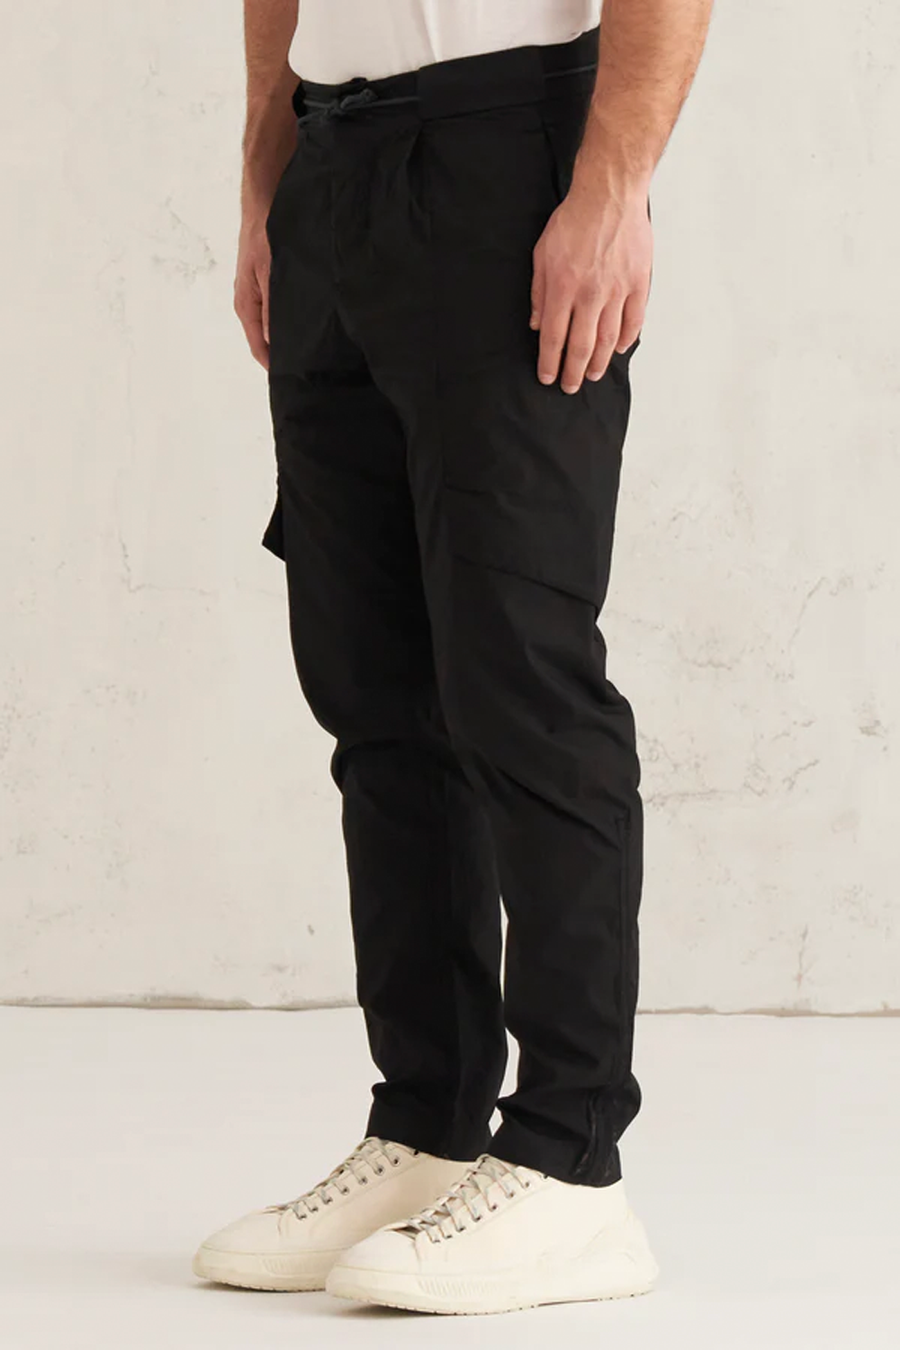 Buy the Transit Light Cotton Cargo Trousers in Black at Intro. Spend £50 for free UK delivery. Official stockists. We ship worldwide.